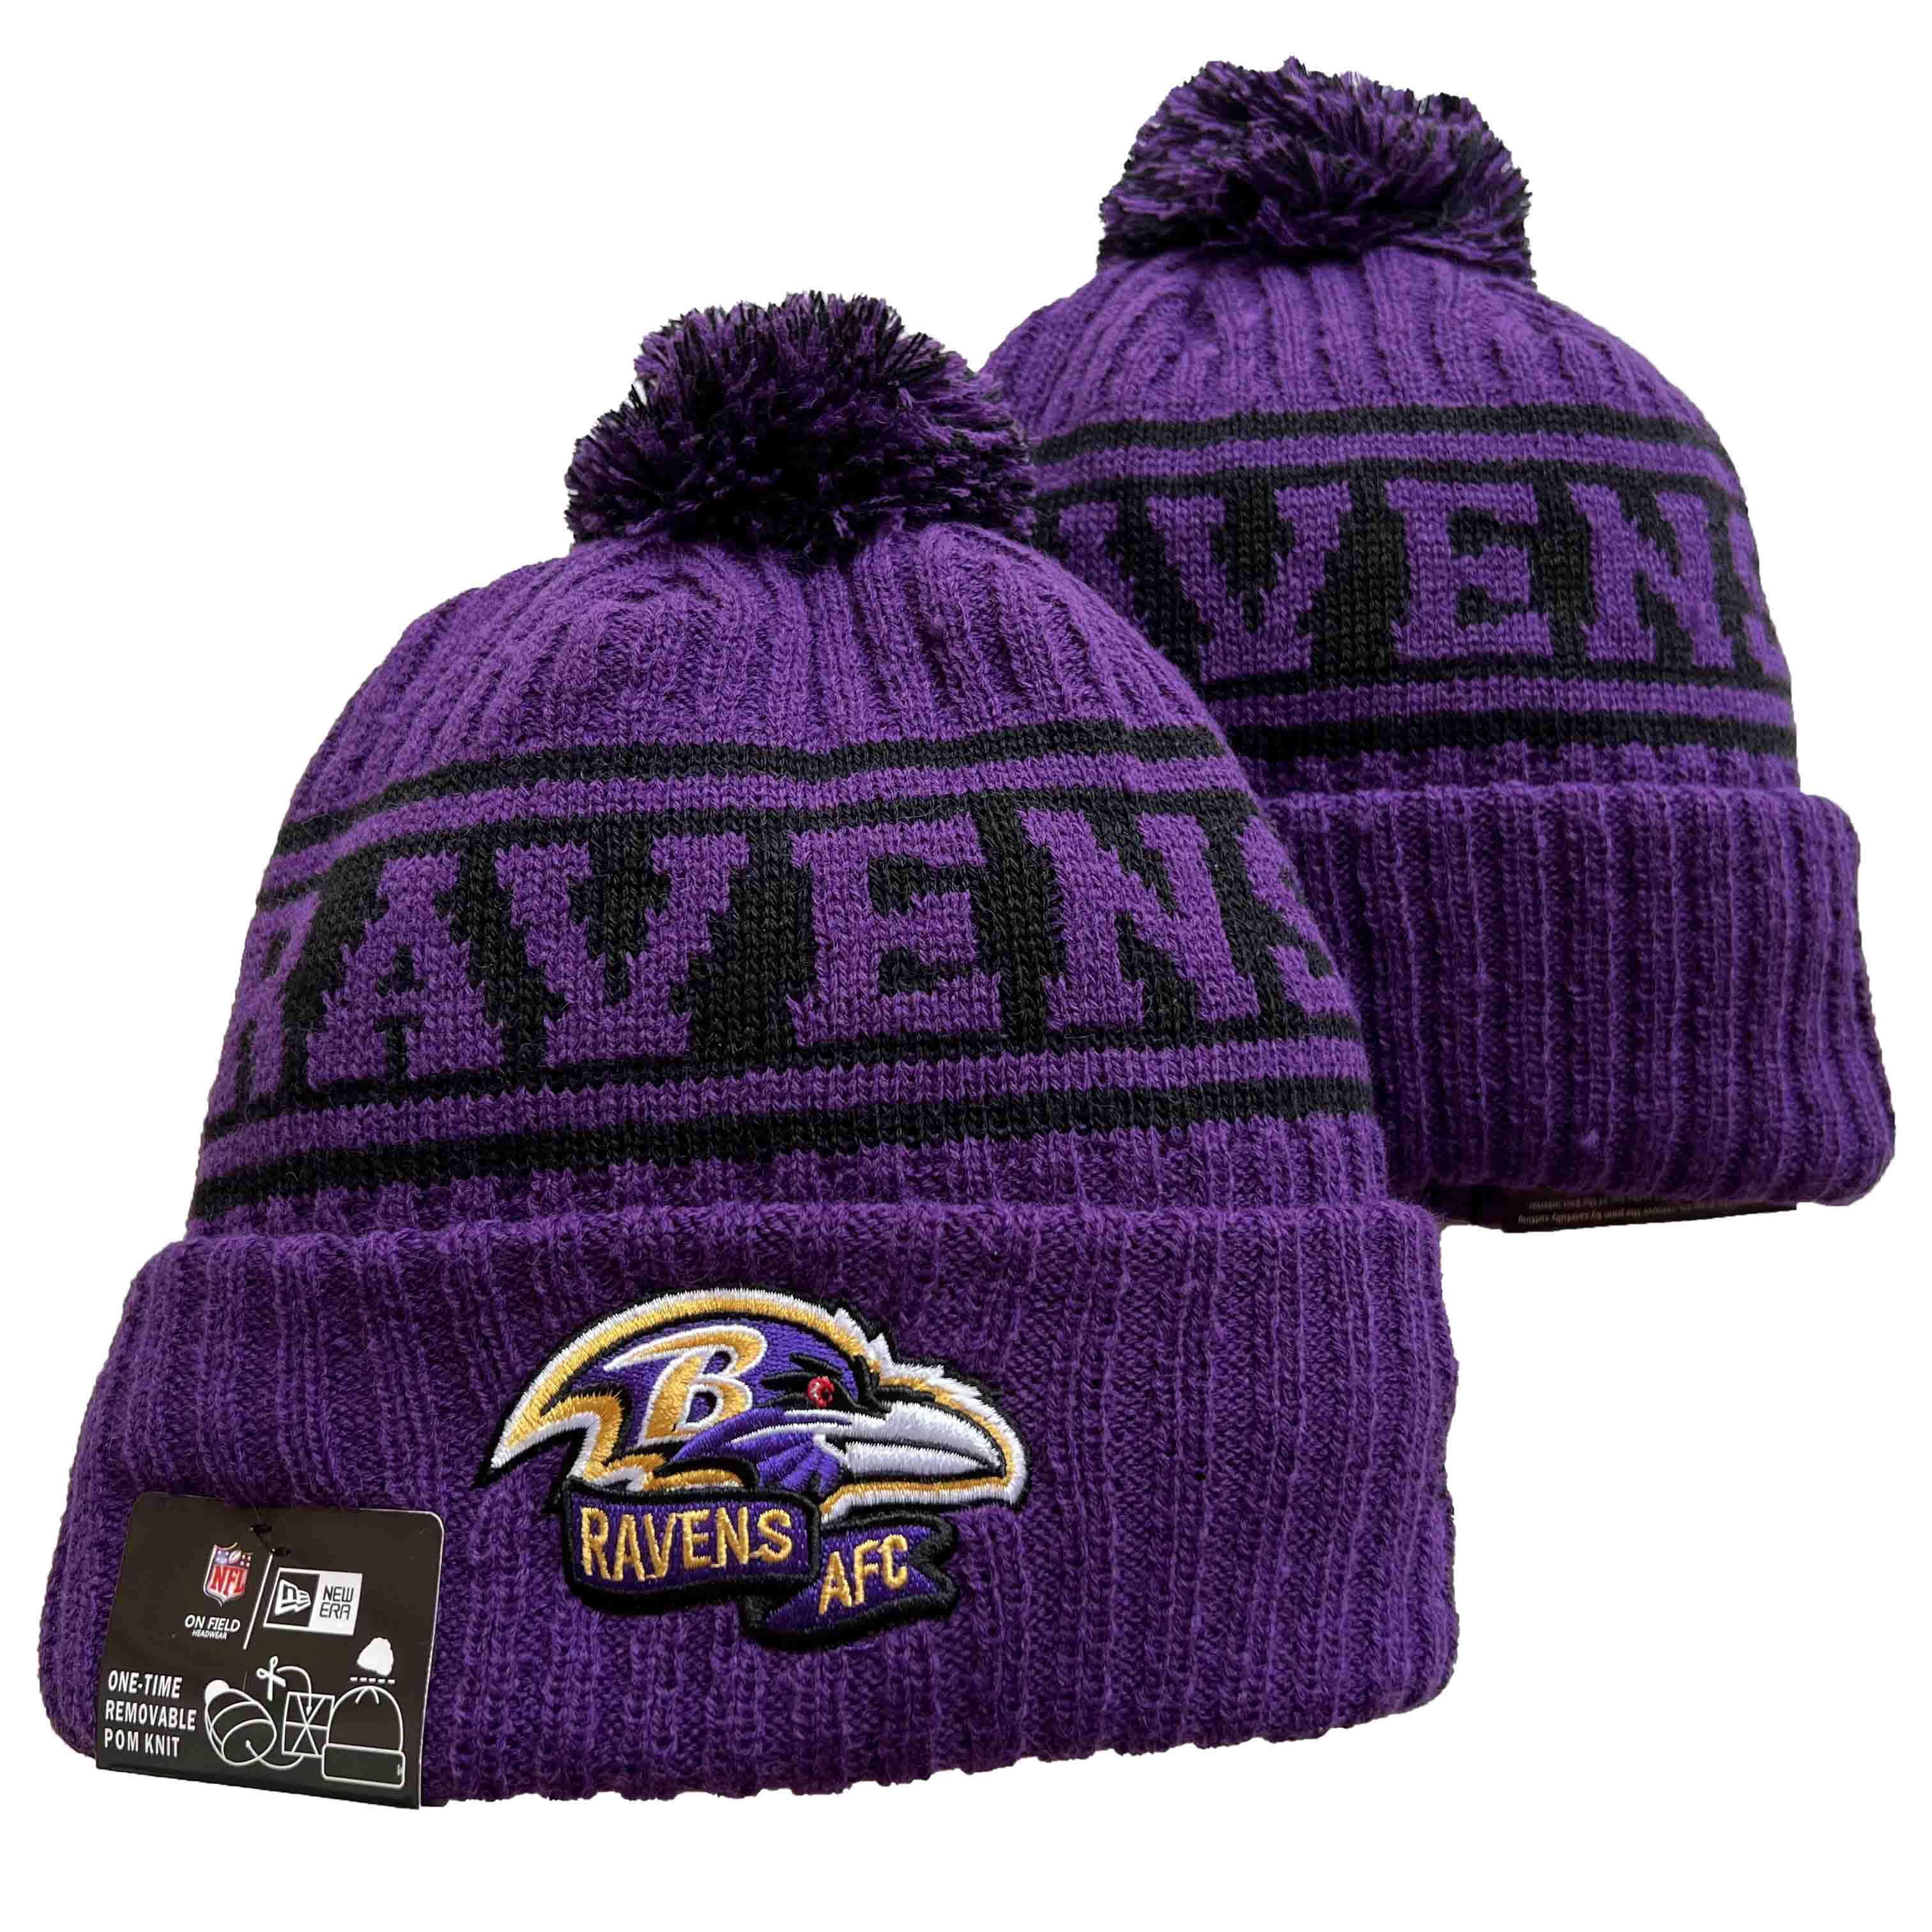 NFL Baltimore Ravens Beanies Knit Hats-YD1190